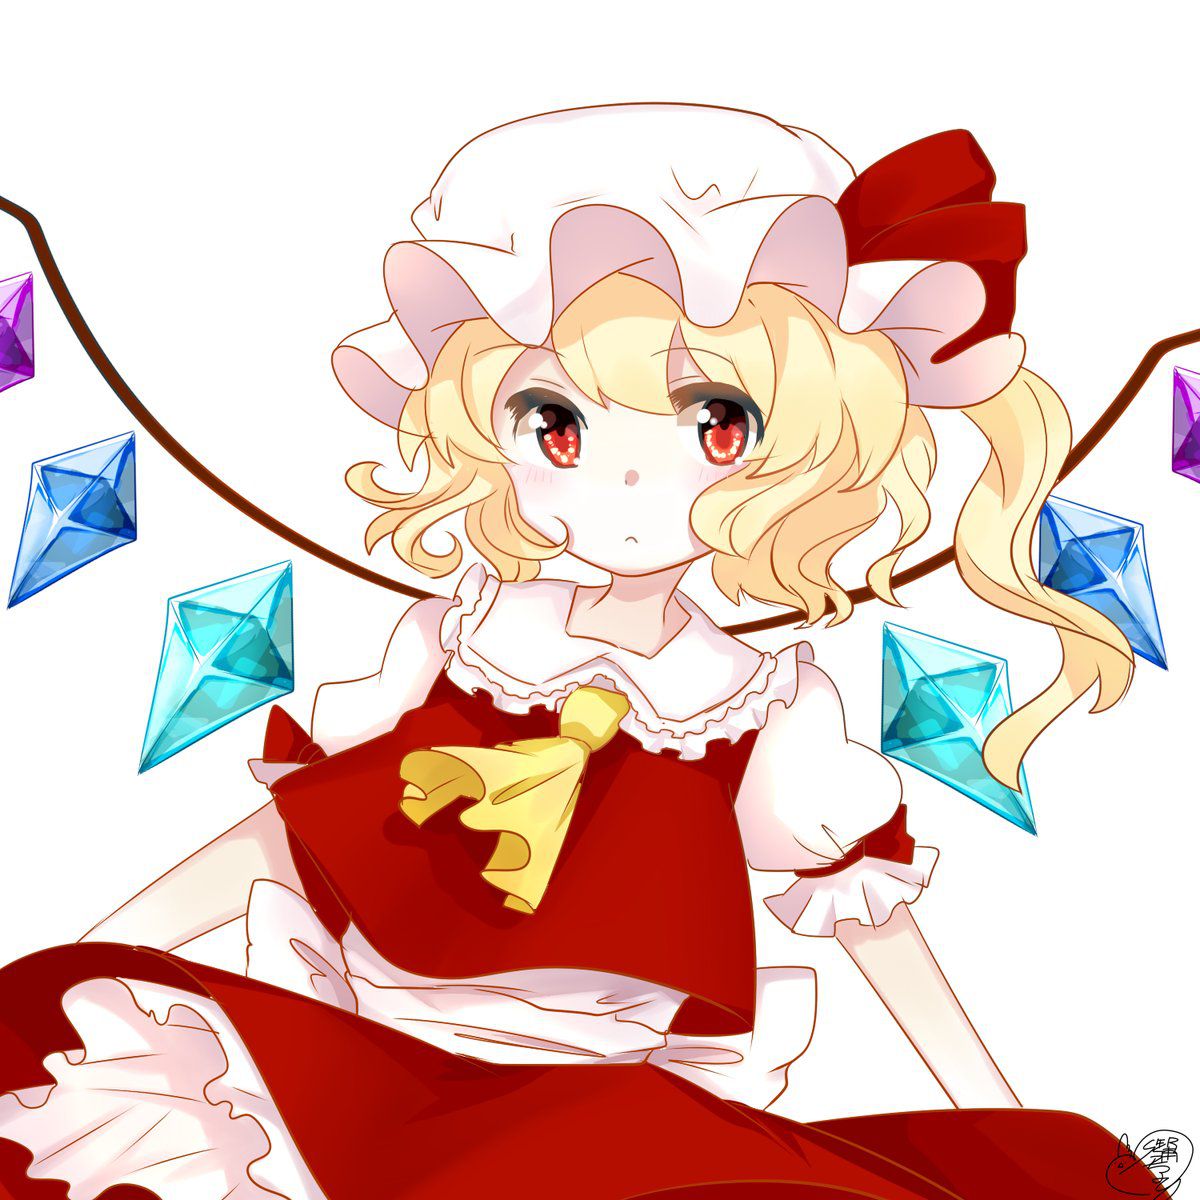 Touhou one droid roundup 2017/12/22 minutes 50 sheets 47